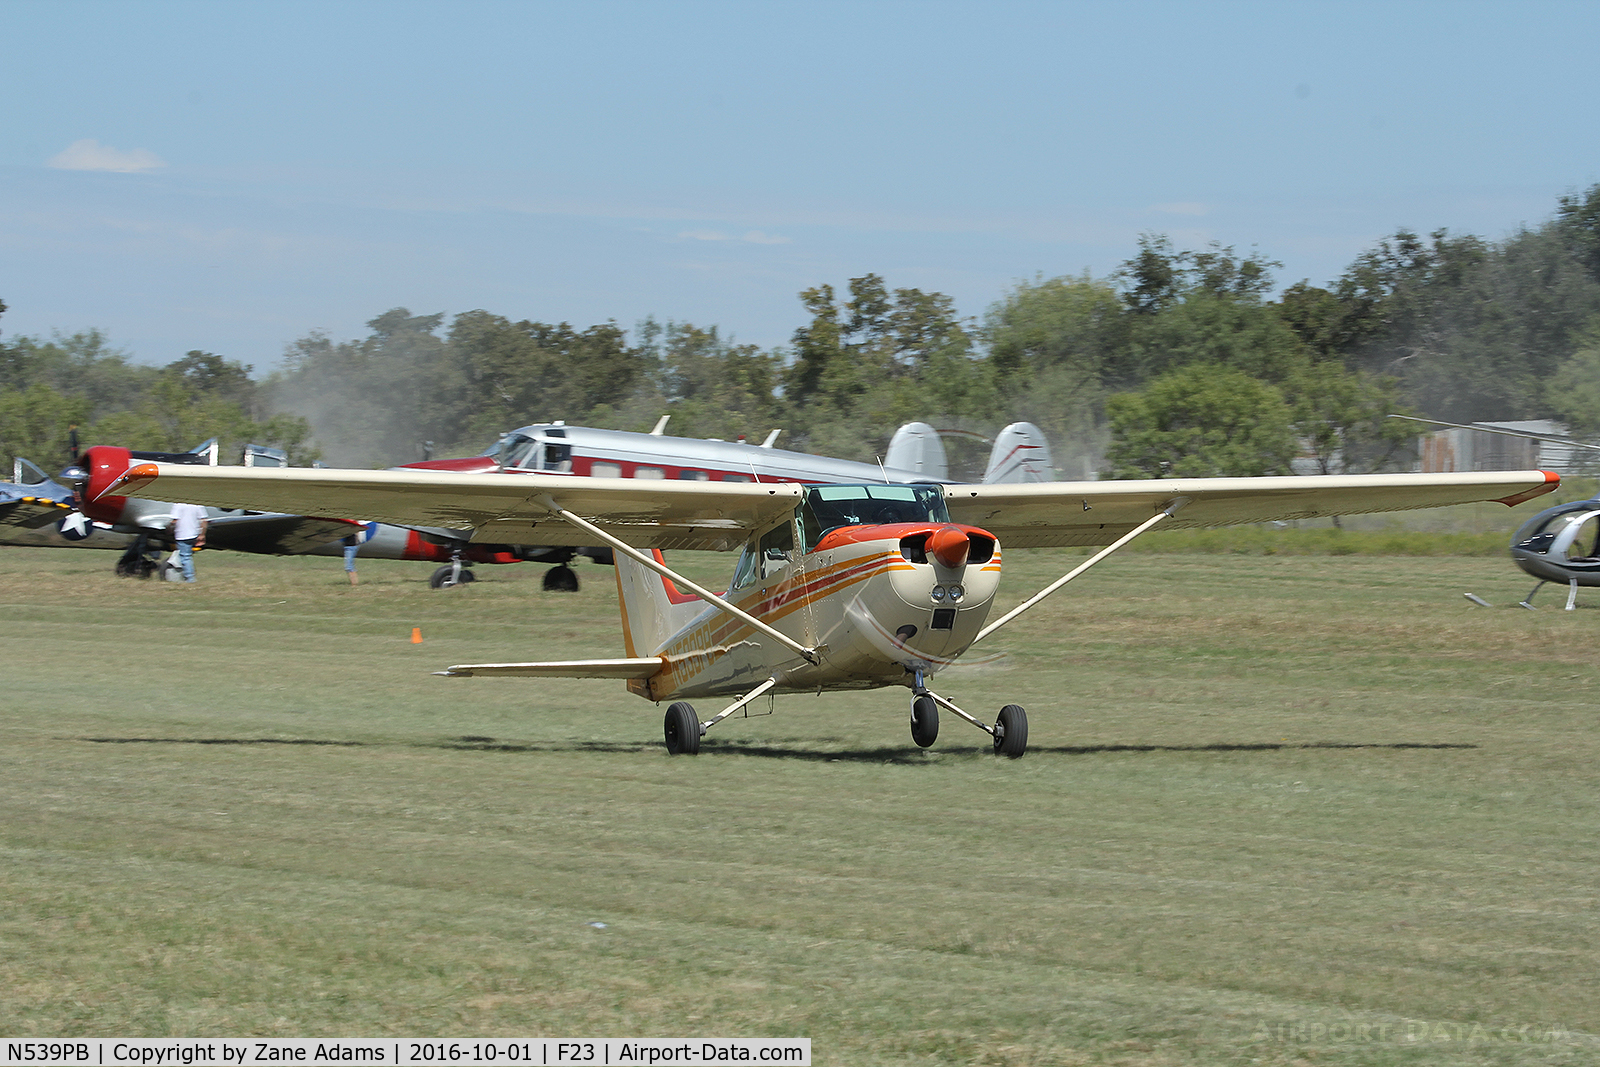 N539PB, 1974 Cessna 172M C/N 17264402, At the 2016 Ranger, Texas Fly-in